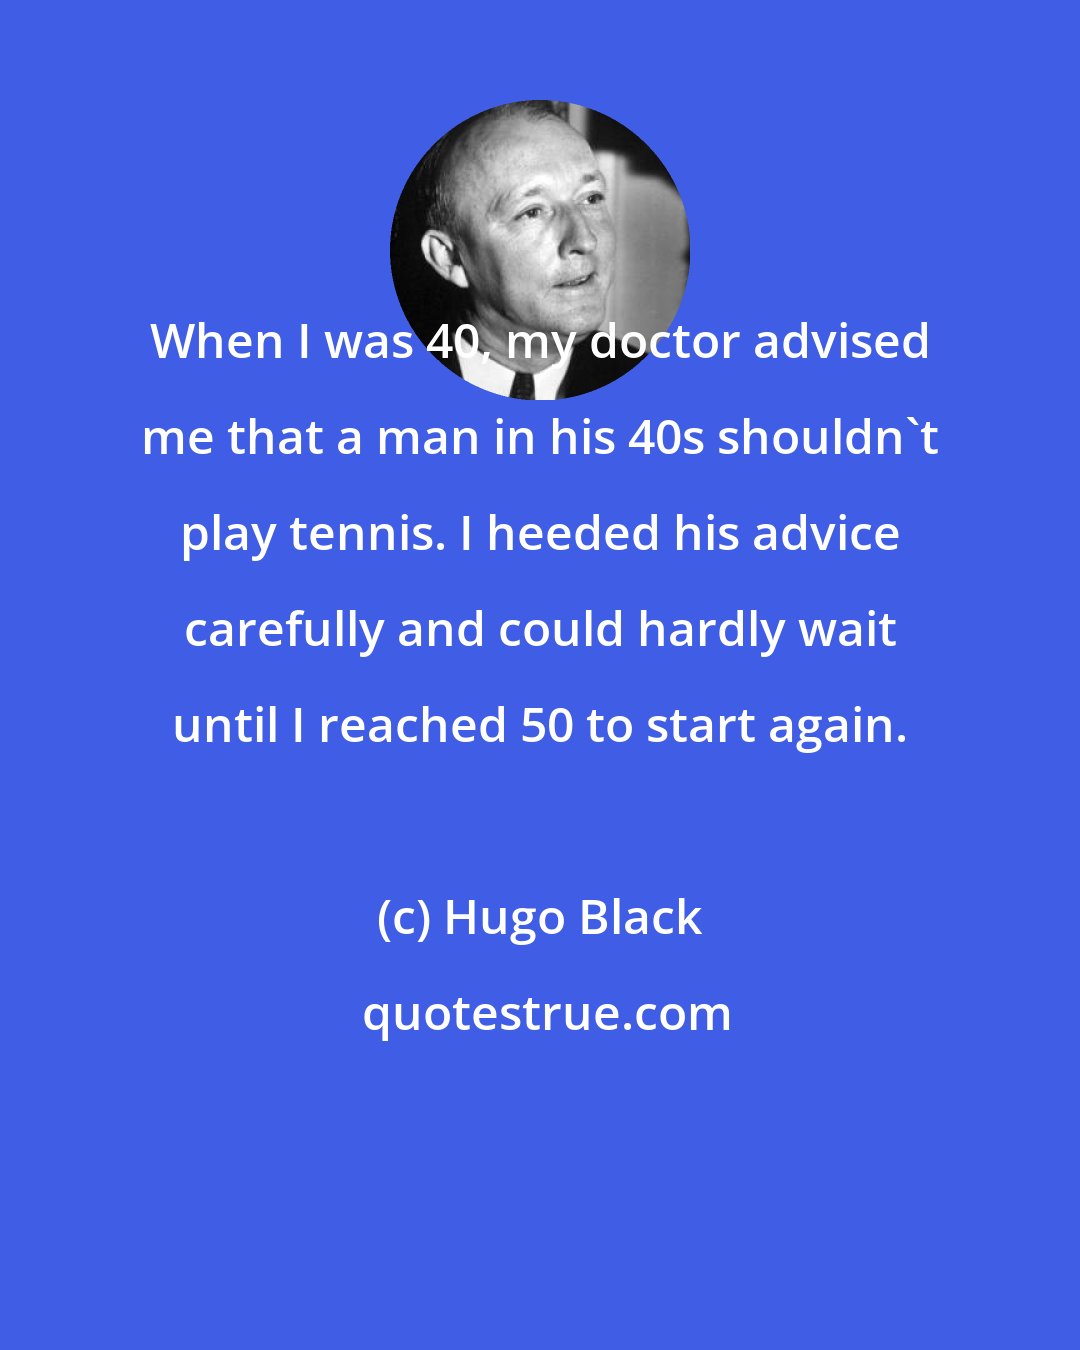 Hugo Black: When I was 40, my doctor advised me that a man in his 40s shouldn't play tennis. I heeded his advice carefully and could hardly wait until I reached 50 to start again.